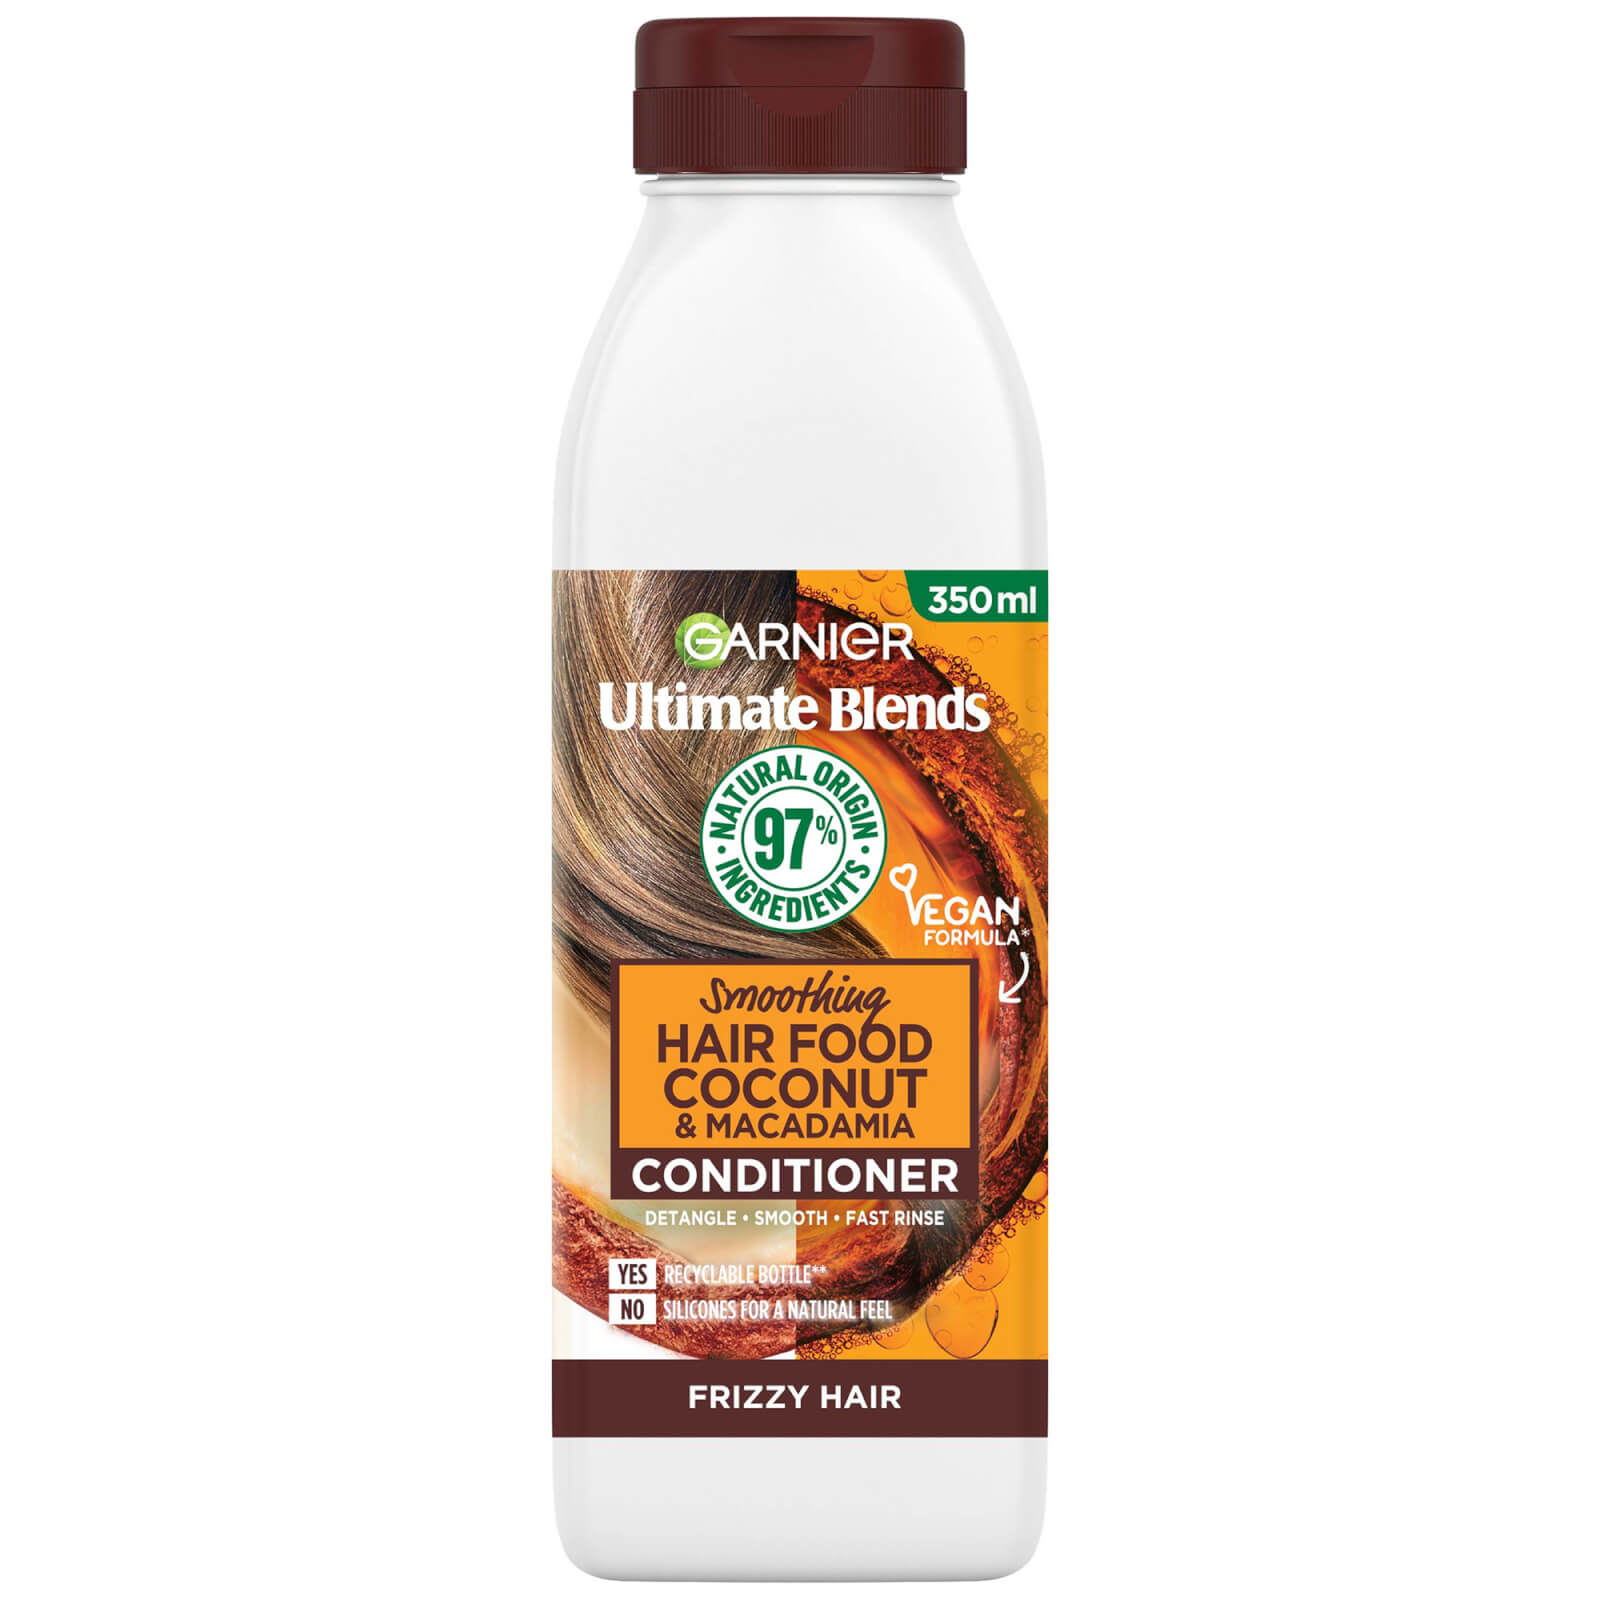 Image of Garnier Ultimate Blends Smoothing Hair Food Coconut Conditioner for Frizzy Hair 350ml